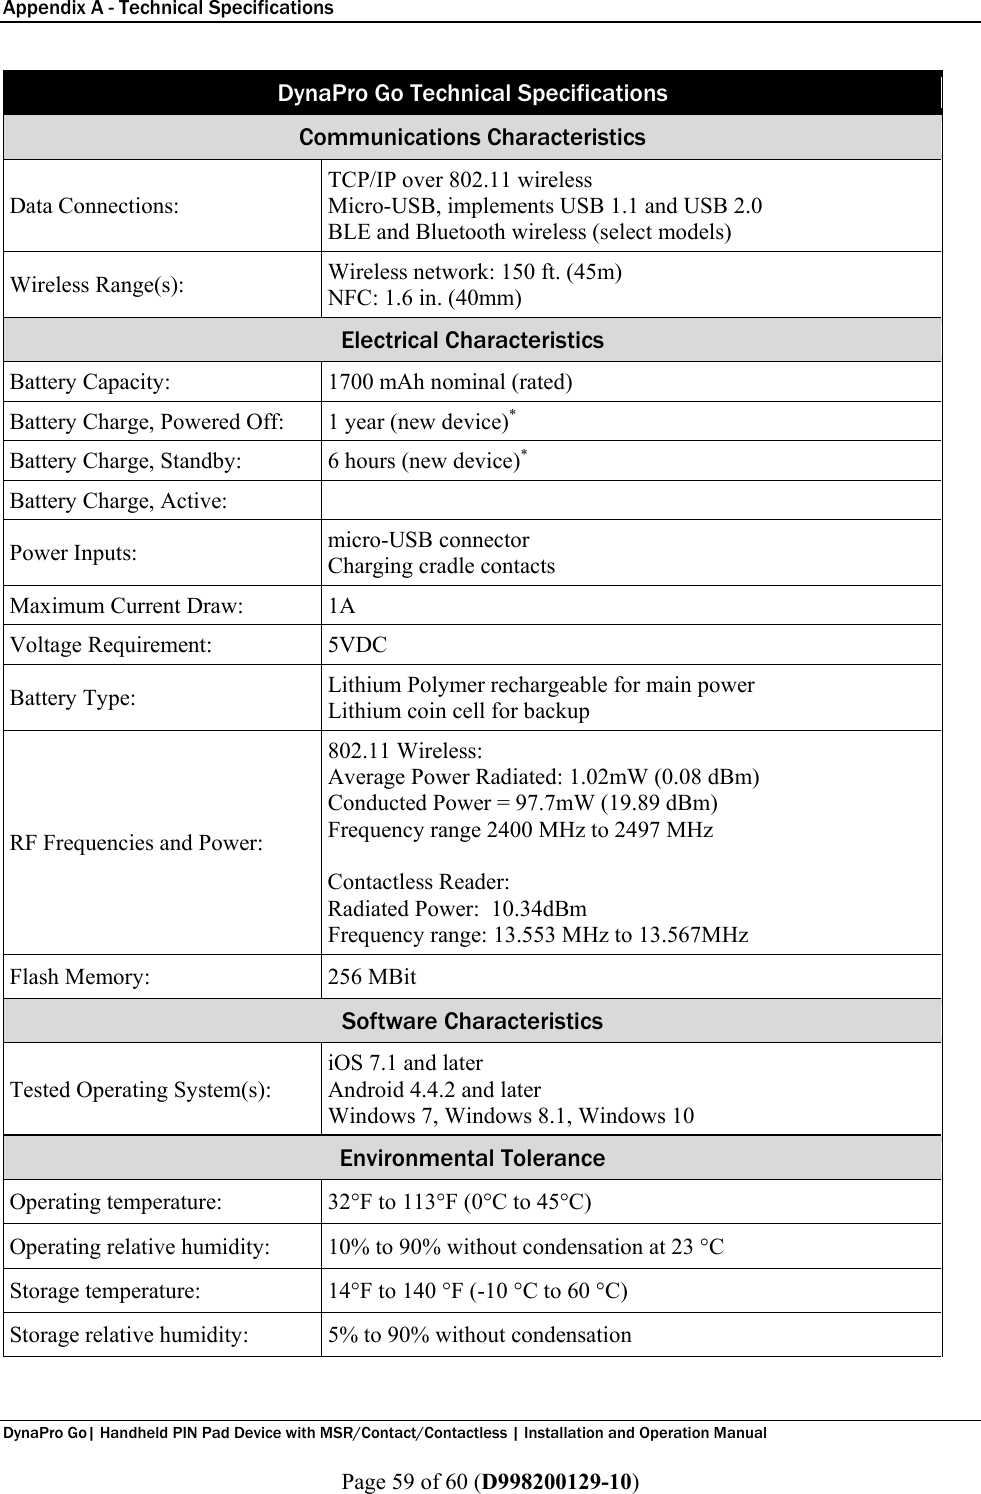 Appendix A - Technical Specifications  DynaPro Go| Handheld PIN Pad Device with MSR/Contact/Contactless | Installation and Operation Manual  Page 59 of 60 (D998200129-10) DynaPro Go Technical Specifications Communications Characteristics Data Connections: TCP/IP over 802.11 wireless Micro-USB, implements USB 1.1 and USB 2.0 BLE and Bluetooth wireless (select models) Wireless Range(s): Wireless network: 150 ft. (45m) NFC: 1.6 in. (40mm) Electrical Characteristics Battery Capacity: 1700 mAh nominal (rated) Battery Charge, Powered Off: 1 year (new device)* Battery Charge, Standby: 6 hours (new device)* Battery Charge, Active:  Power Inputs: micro-USB connector Charging cradle contacts Maximum Current Draw: 1A Voltage Requirement: 5VDC Battery Type: Lithium Polymer rechargeable for main power Lithium coin cell for backup RF Frequencies and Power: 802.11 Wireless: Average Power Radiated: 1.02mW (0.08 dBm) Conducted Power = 97.7mW (19.89 dBm) Frequency range 2400 MHz to 2497 MHz  Contactless Reader: Radiated Power:  10.34dBm Frequency range: 13.553 MHz to 13.567MHz Flash Memory: 256 MBit Software Characteristics Tested Operating System(s): iOS 7.1 and later Android 4.4.2 and later Windows 7, Windows 8.1, Windows 10 Environmental Tolerance Operating temperature: 32°F to 113°F (0°C to 45°C) Operating relative humidity: 10% to 90% without condensation at 23 °C Storage temperature: 14°F to 140 °F (-10 °C to 60 °C) Storage relative humidity: 5% to 90% without condensation 